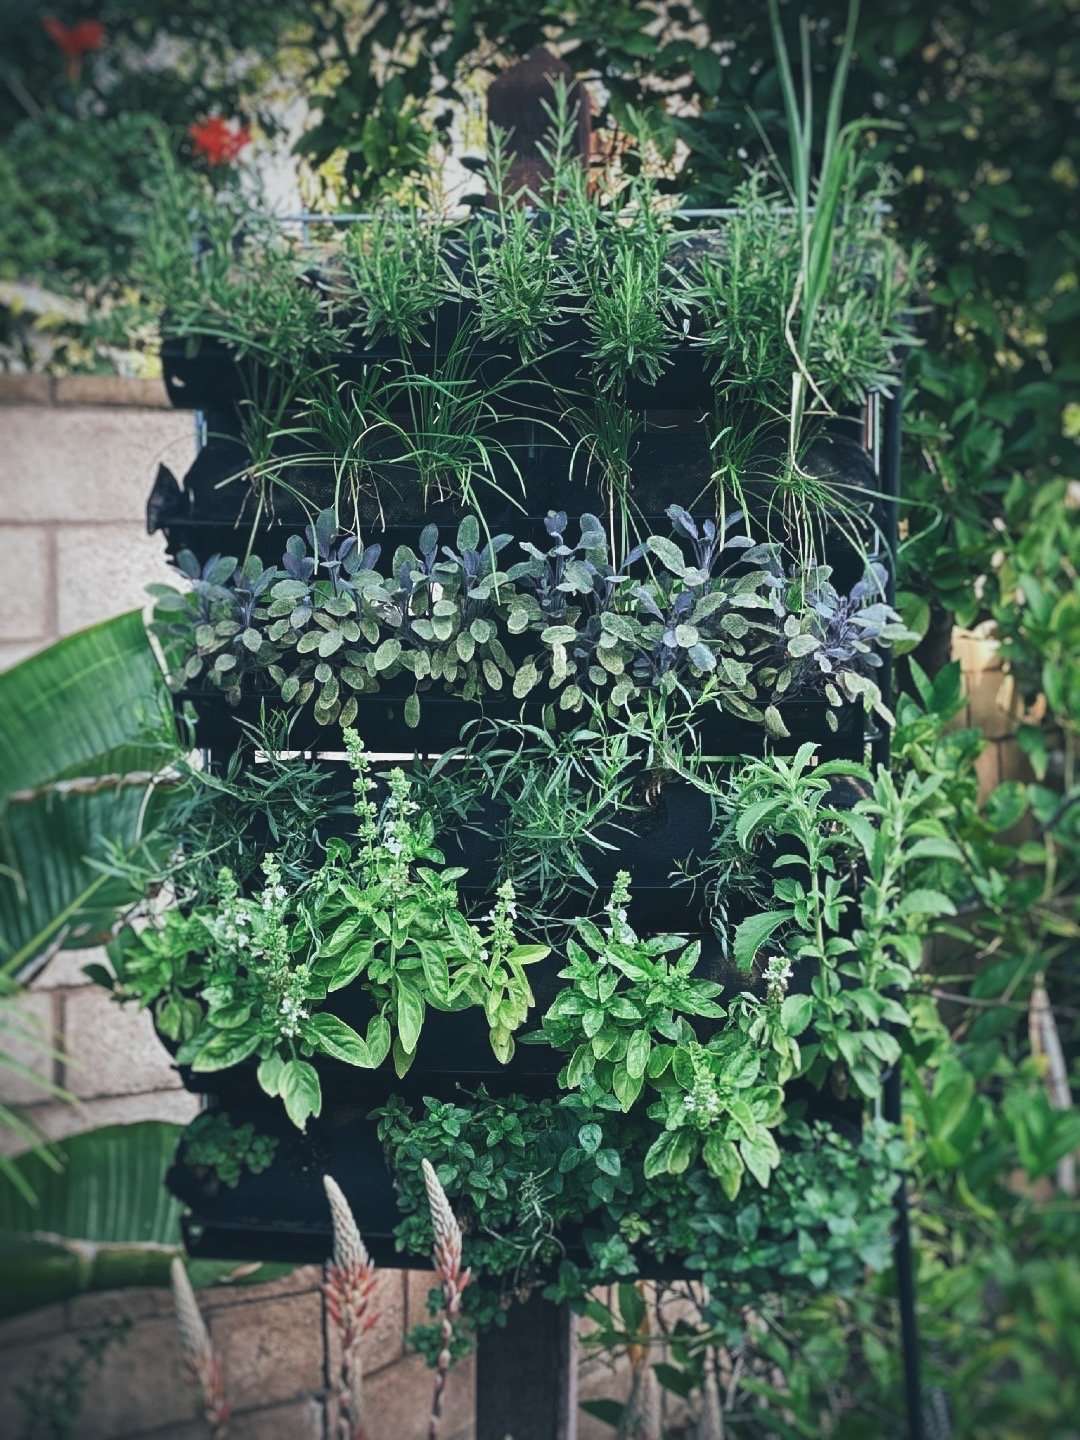 Vertical Garden Supply kit on display with many plants on an outside patio